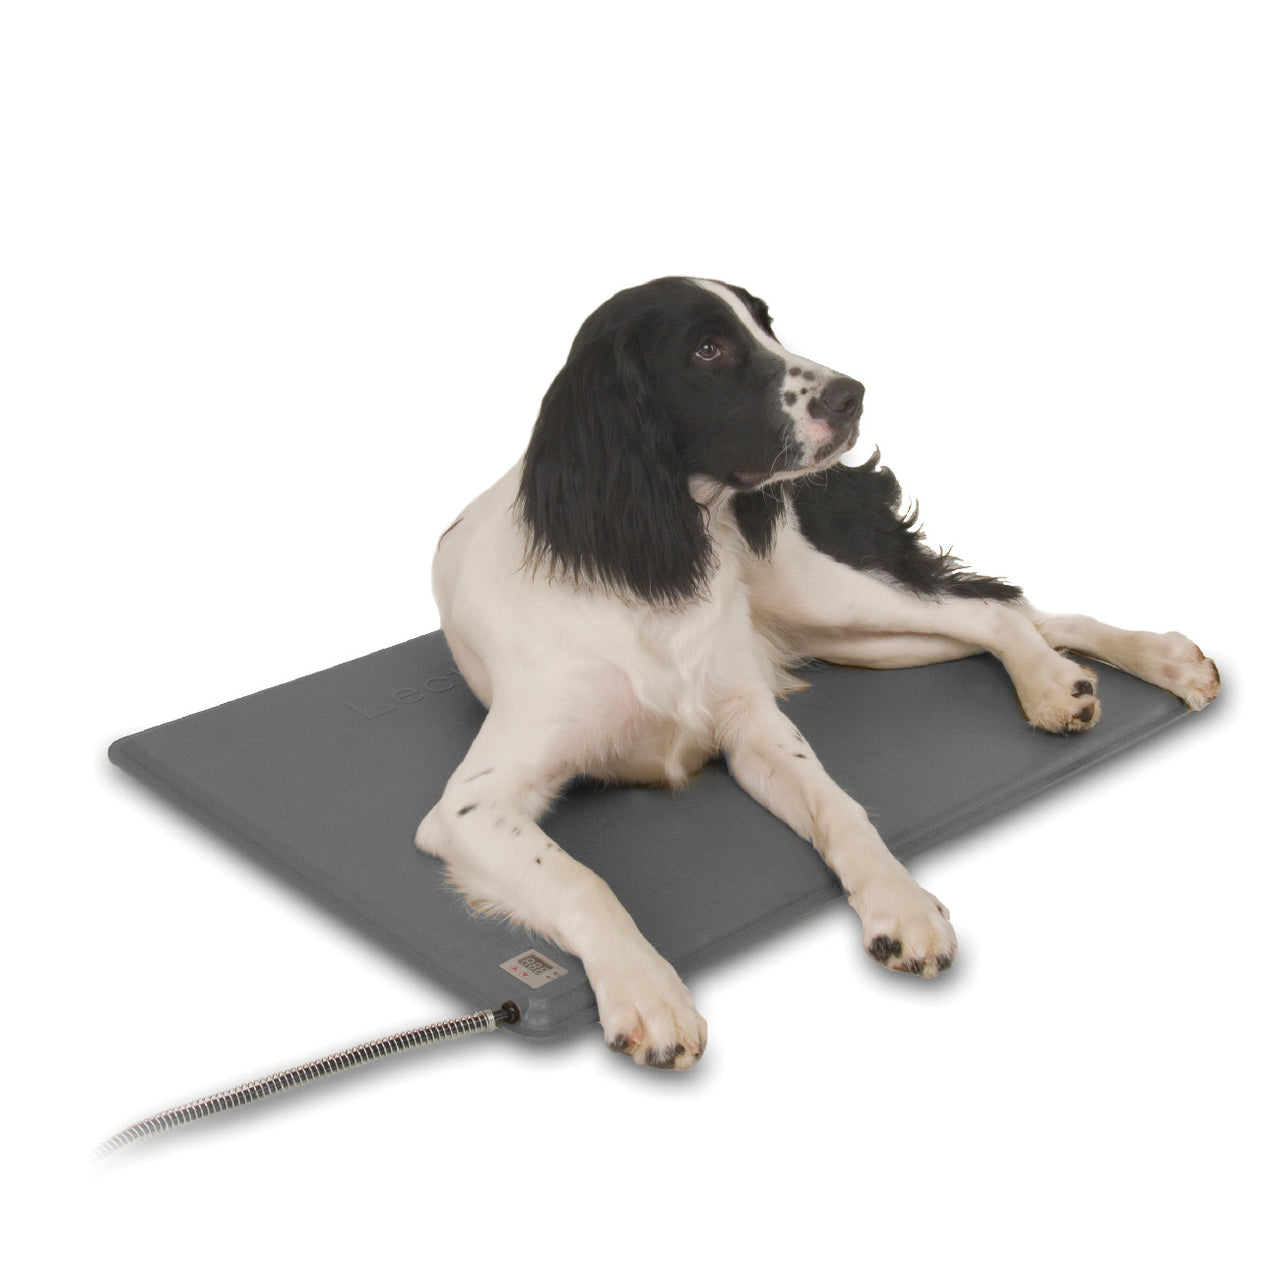 K&h Pet Products Deluxe Lectro-Kennel & Cover Heated Pad (Large-80W) - Deluxe Lectro-Kennel Outdoor Heated Pad Black K&h Pet Products -